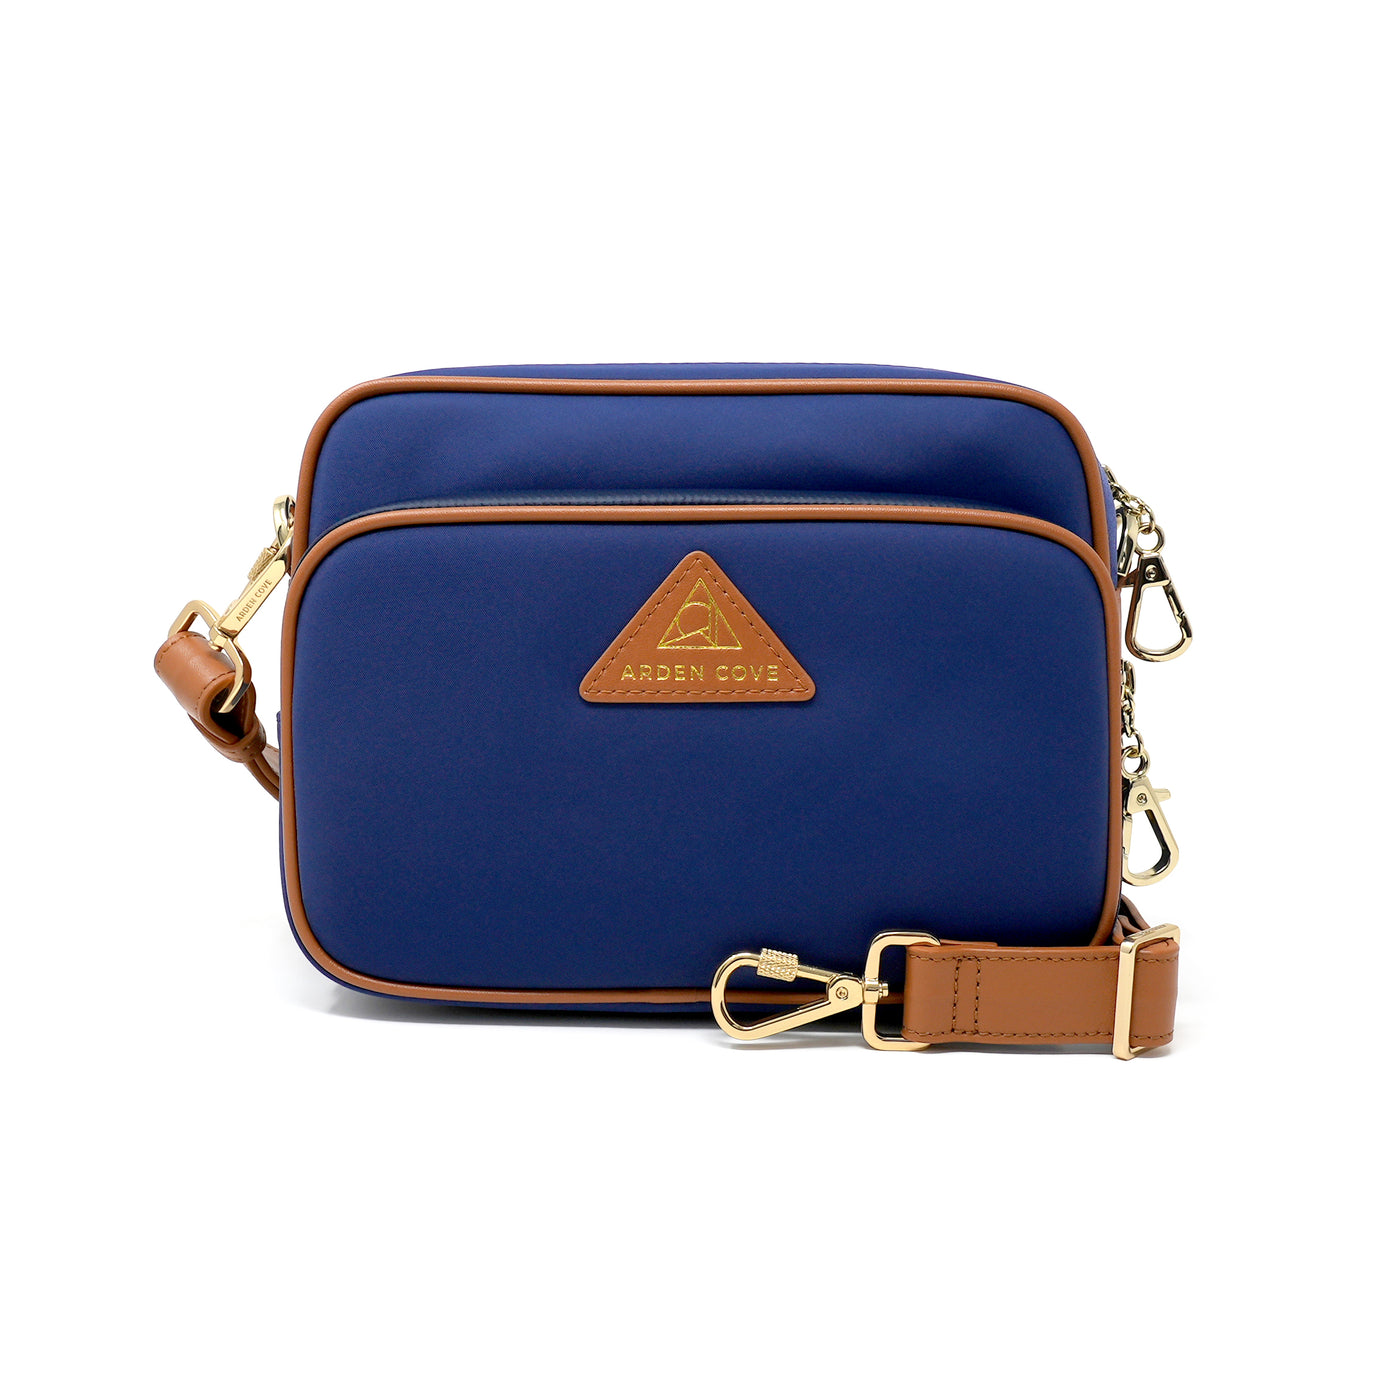 Anti-theft Water-resistant Travel Crossbody - Crissy Full Crossbody in Navy Gold with slash-resistant wide faux leather & locking clasps straps - front view - Arden Cove